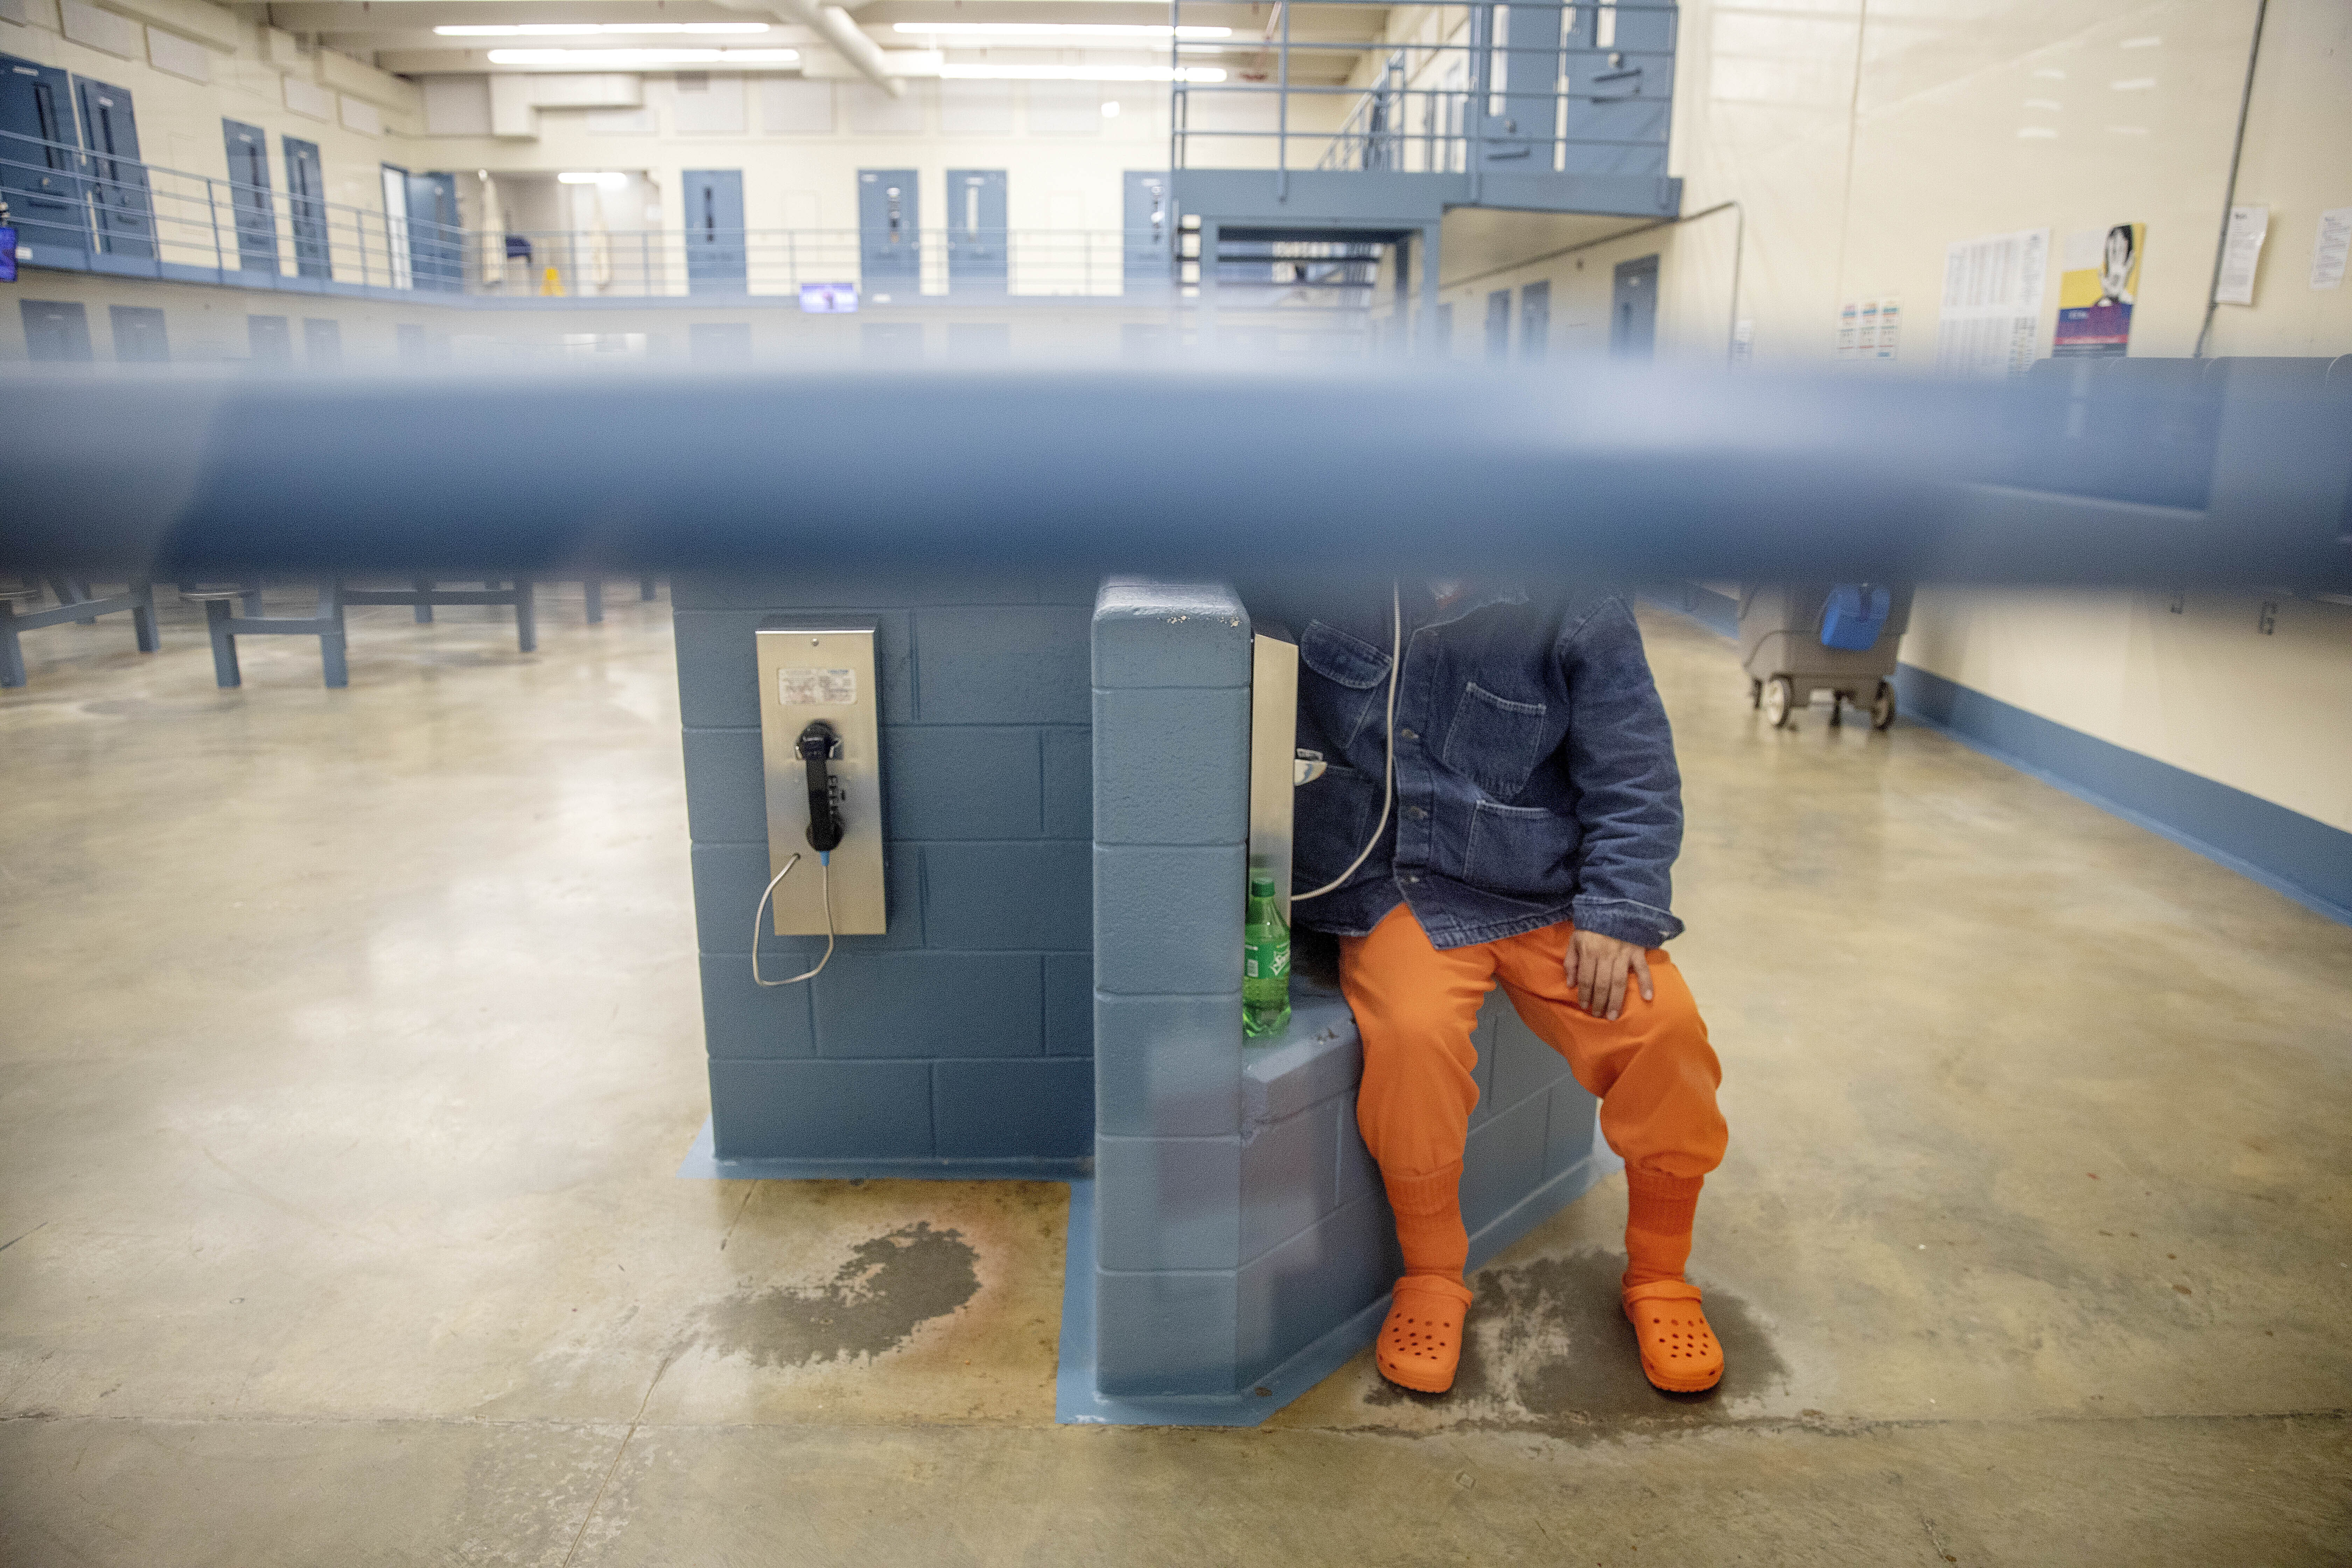 A detainee talks on the phone in his pod at the Stewart Detention Center on Nov. 15, 2019. ICE says it’s working to get those in custody vaccinated. But Amilcar Valencia, executive director of El Refugio, says health concerns in ICE detention centers in Georgia extend beyond COVID-19 and have existed for years. (David Goldman/Associated Press file)